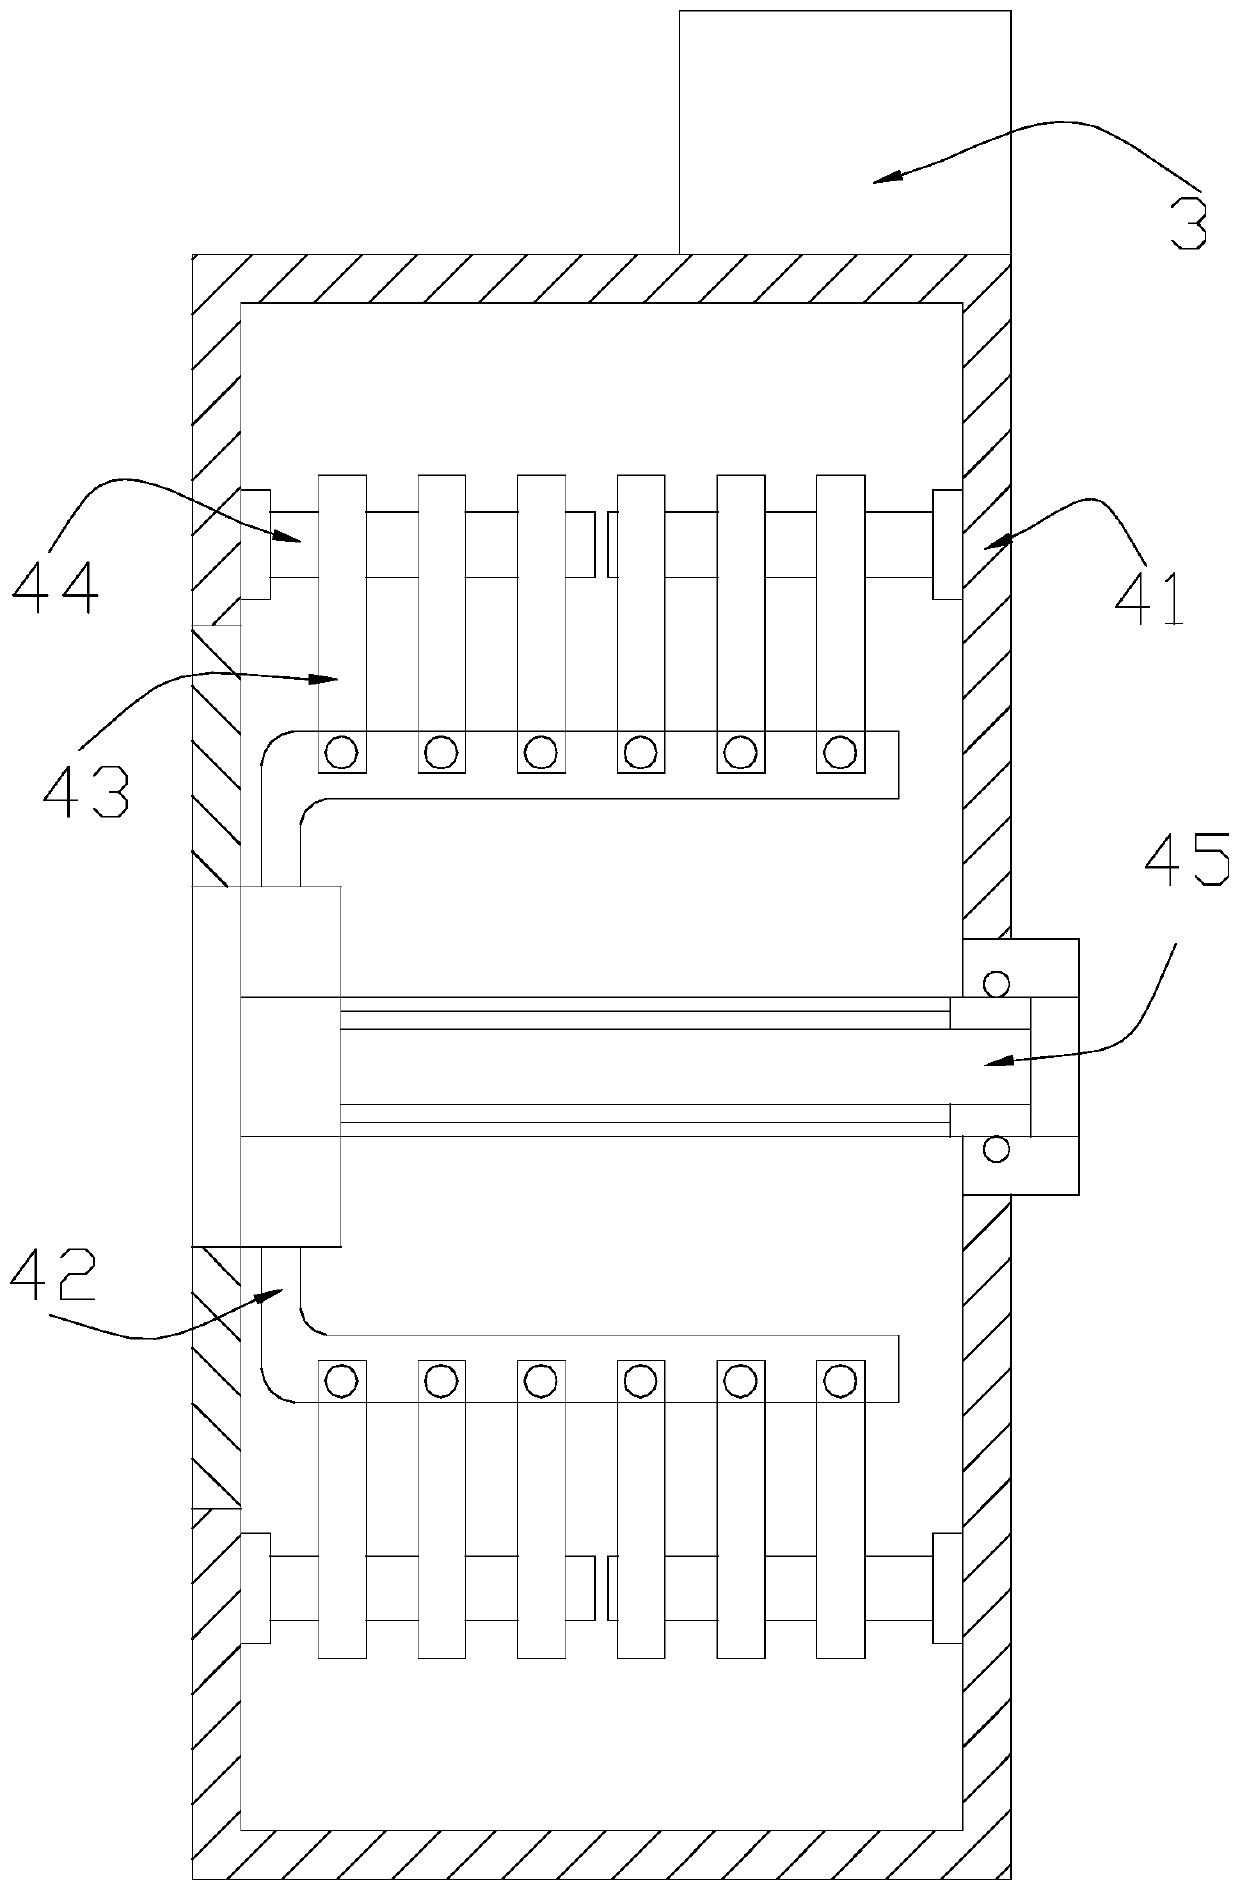 Capacitor film cleaning equipment for preventing overlapping through centrifugal force